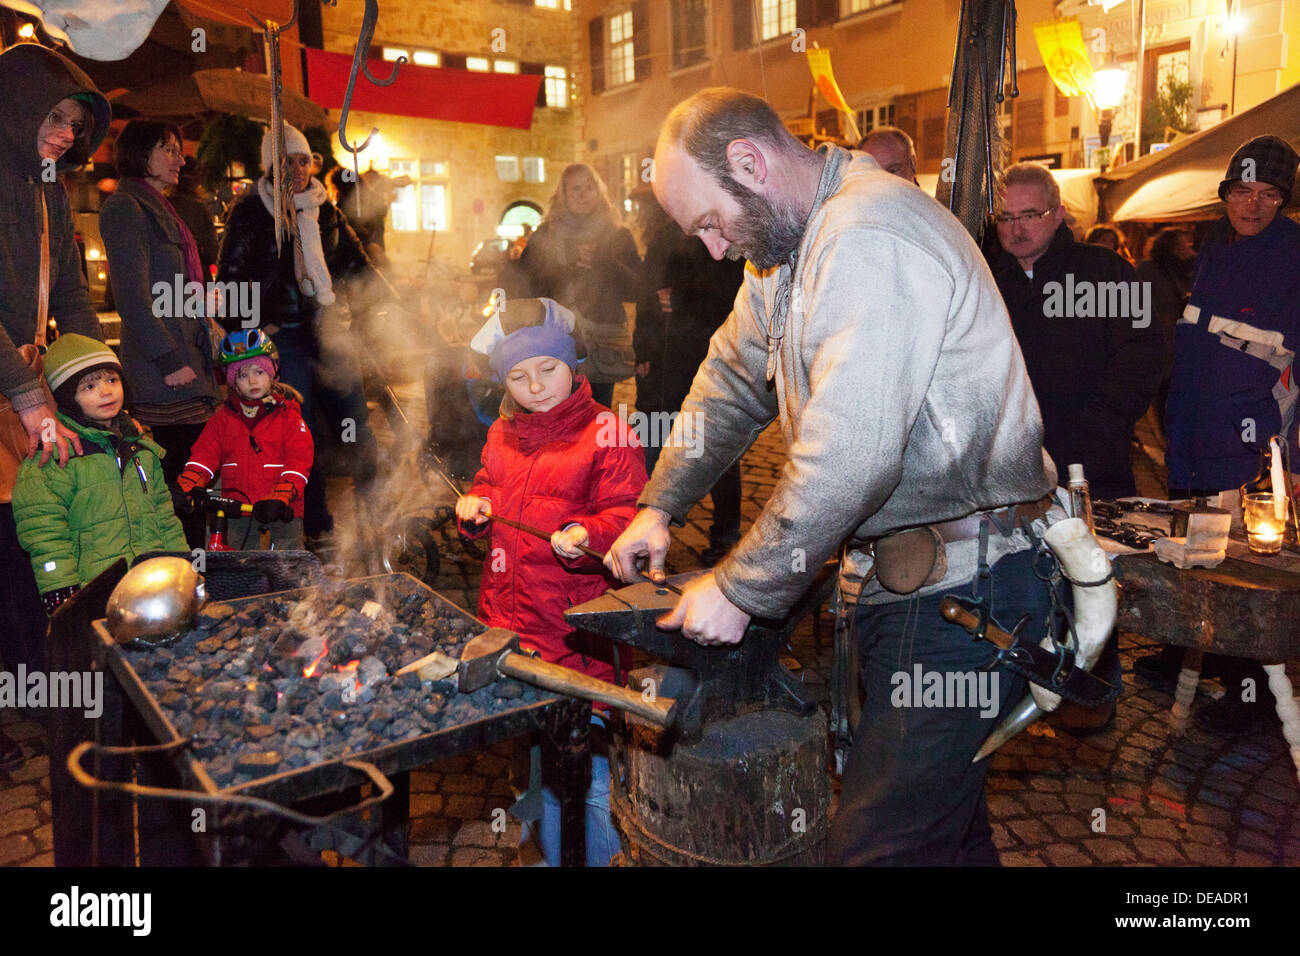 Six year old girl forges an amulet with the help of a blacksmith, Medieval Market, Christmas Fair, Esslingen, Germany Stock Photo